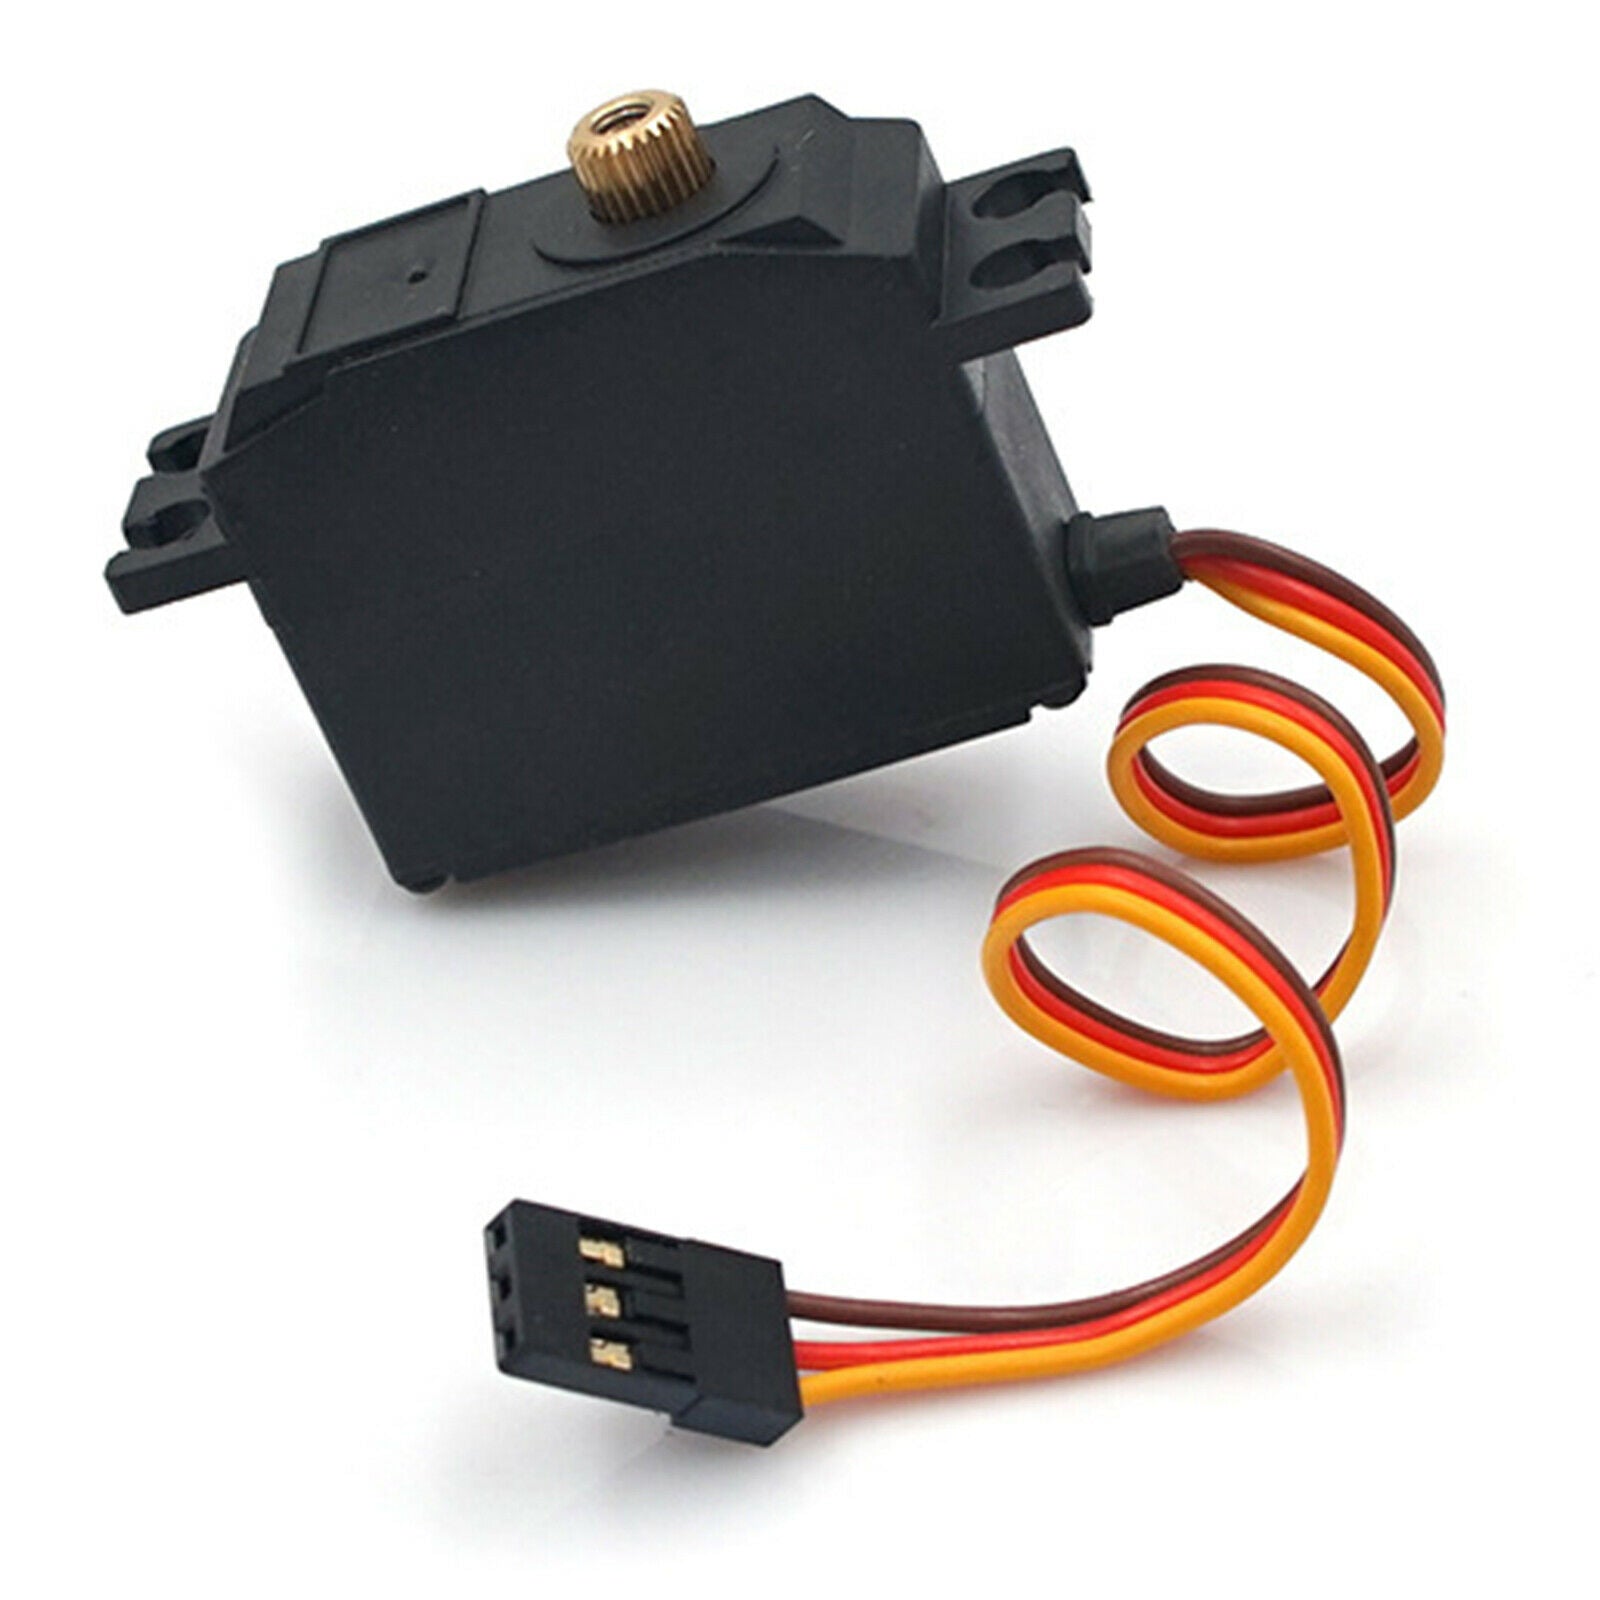 RC 35G Brushless Servo 3 Wire Fit for WLtoys 12428 12423 JJRC Q39 RC Car